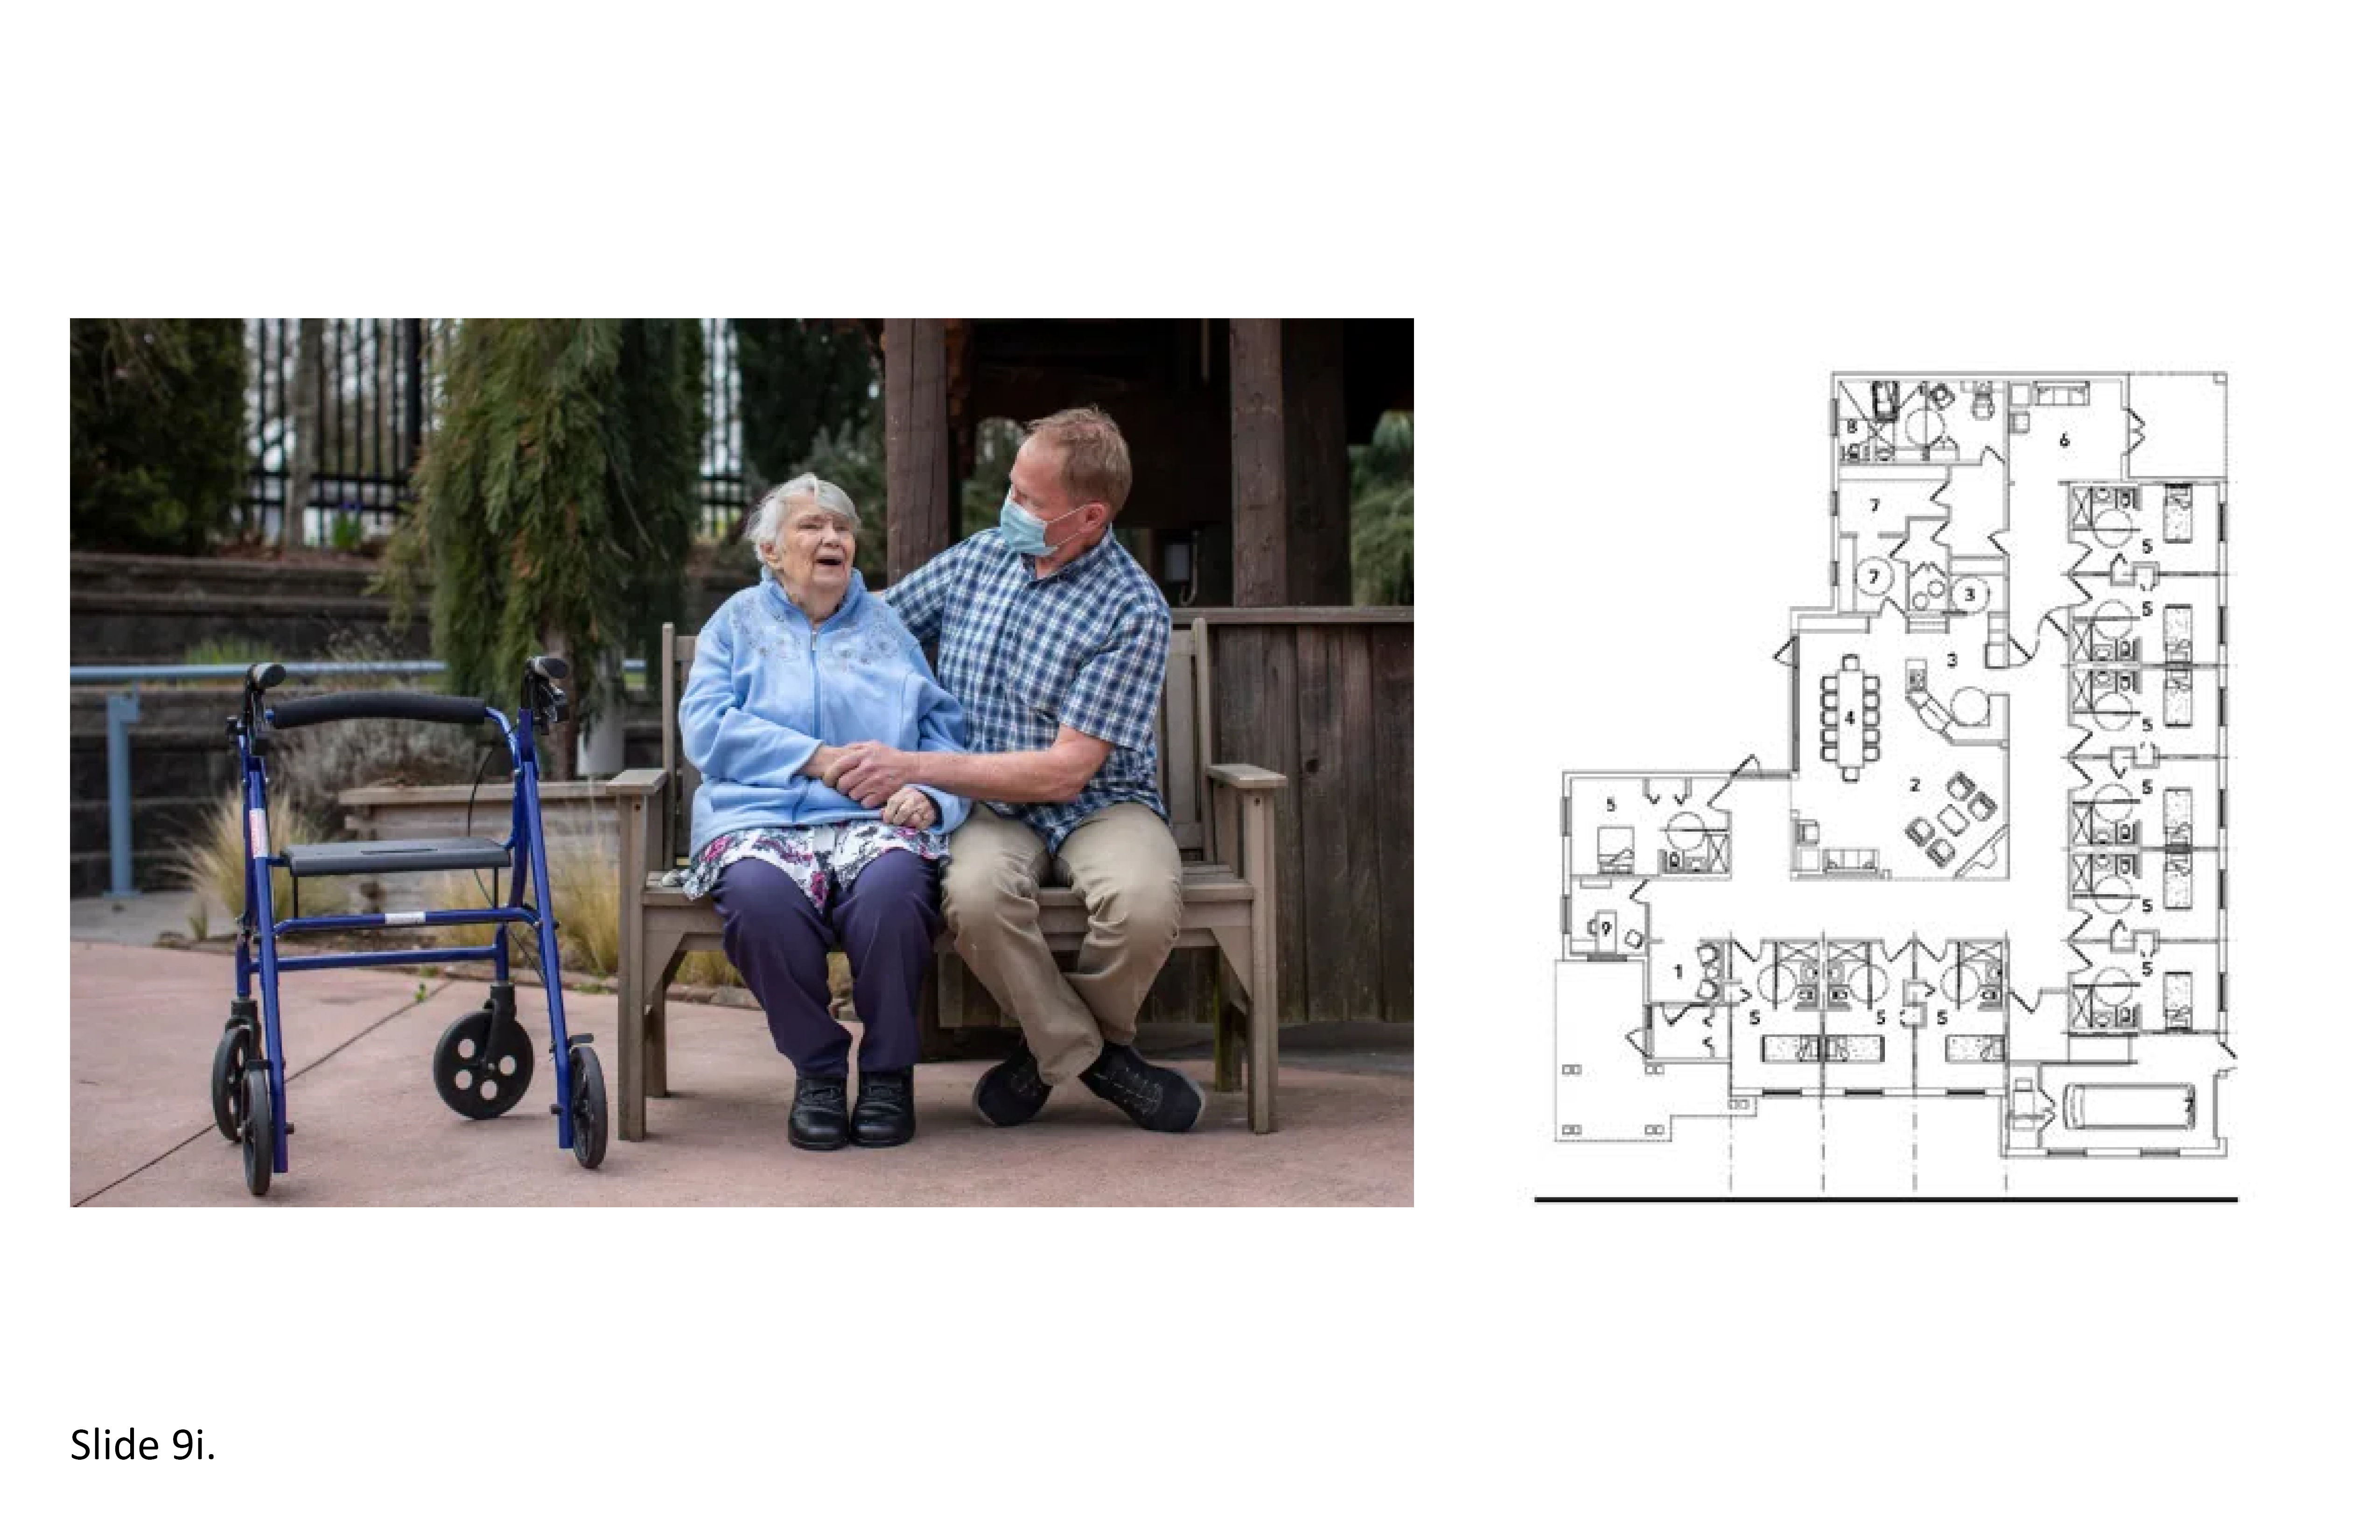 Nursing Homes with Dementia Special Care Units Provide Better